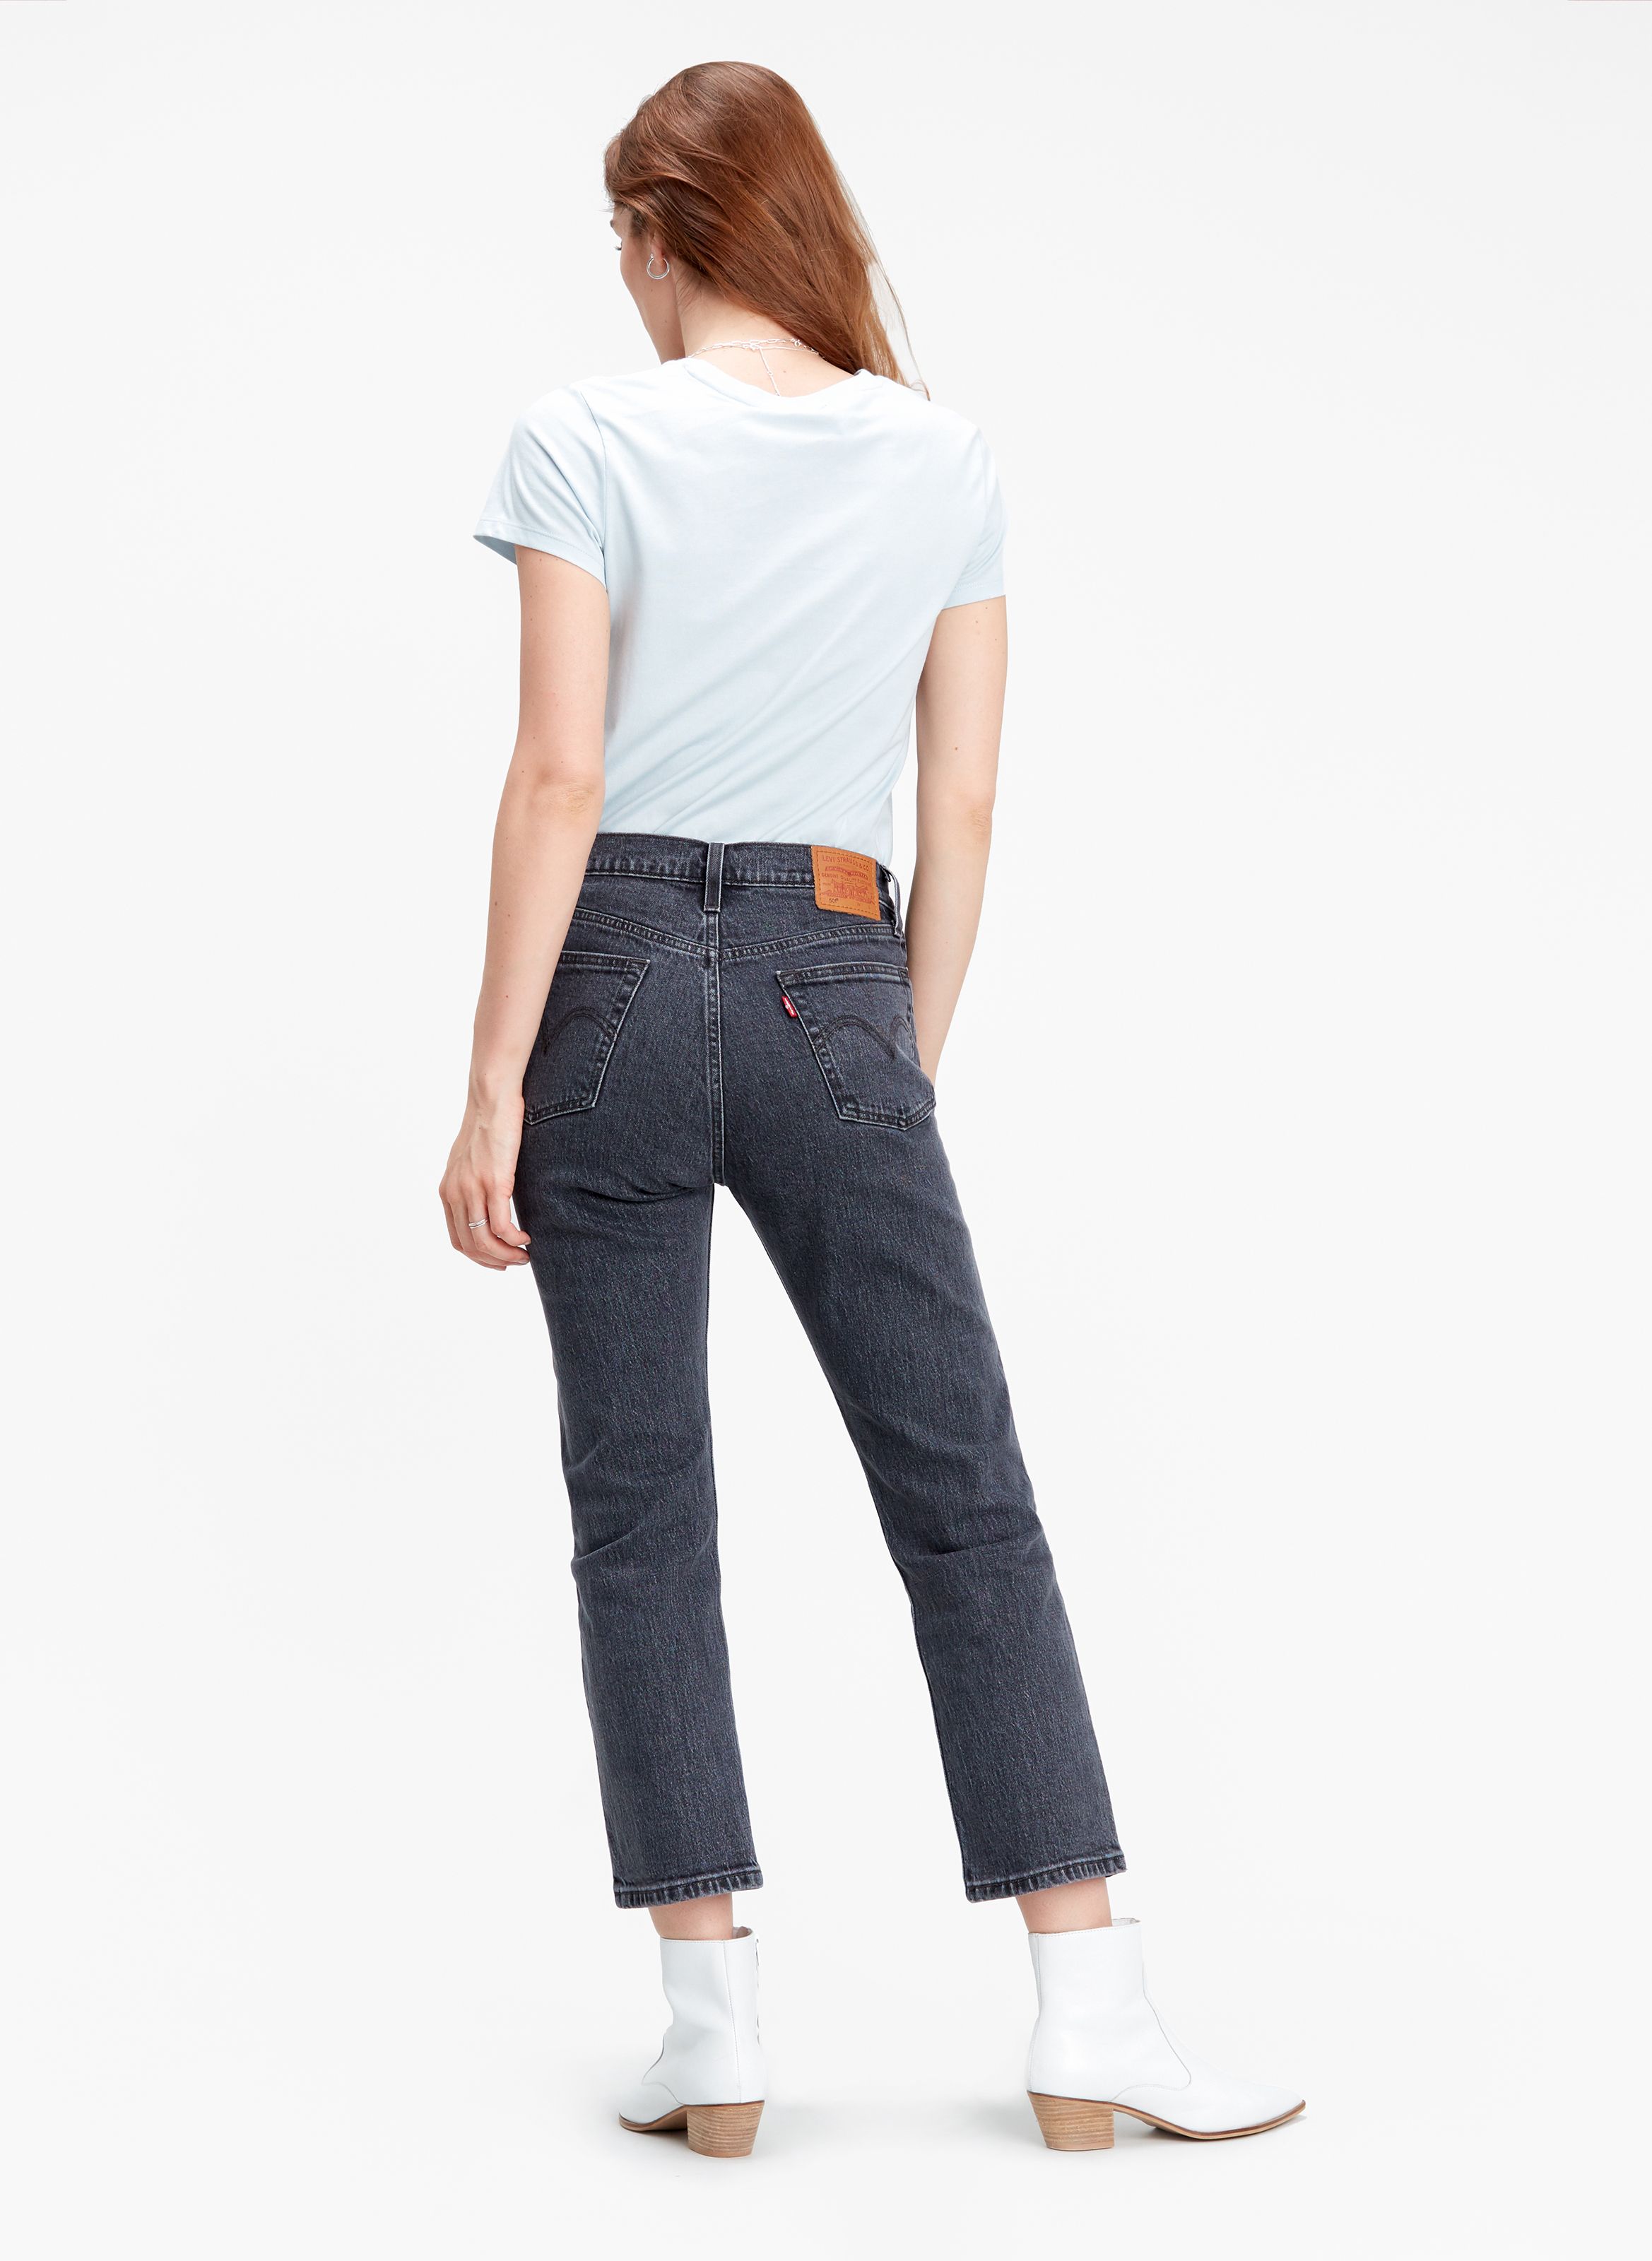 Sale 501 Cropped Jeans Cabo Fade Levi's 